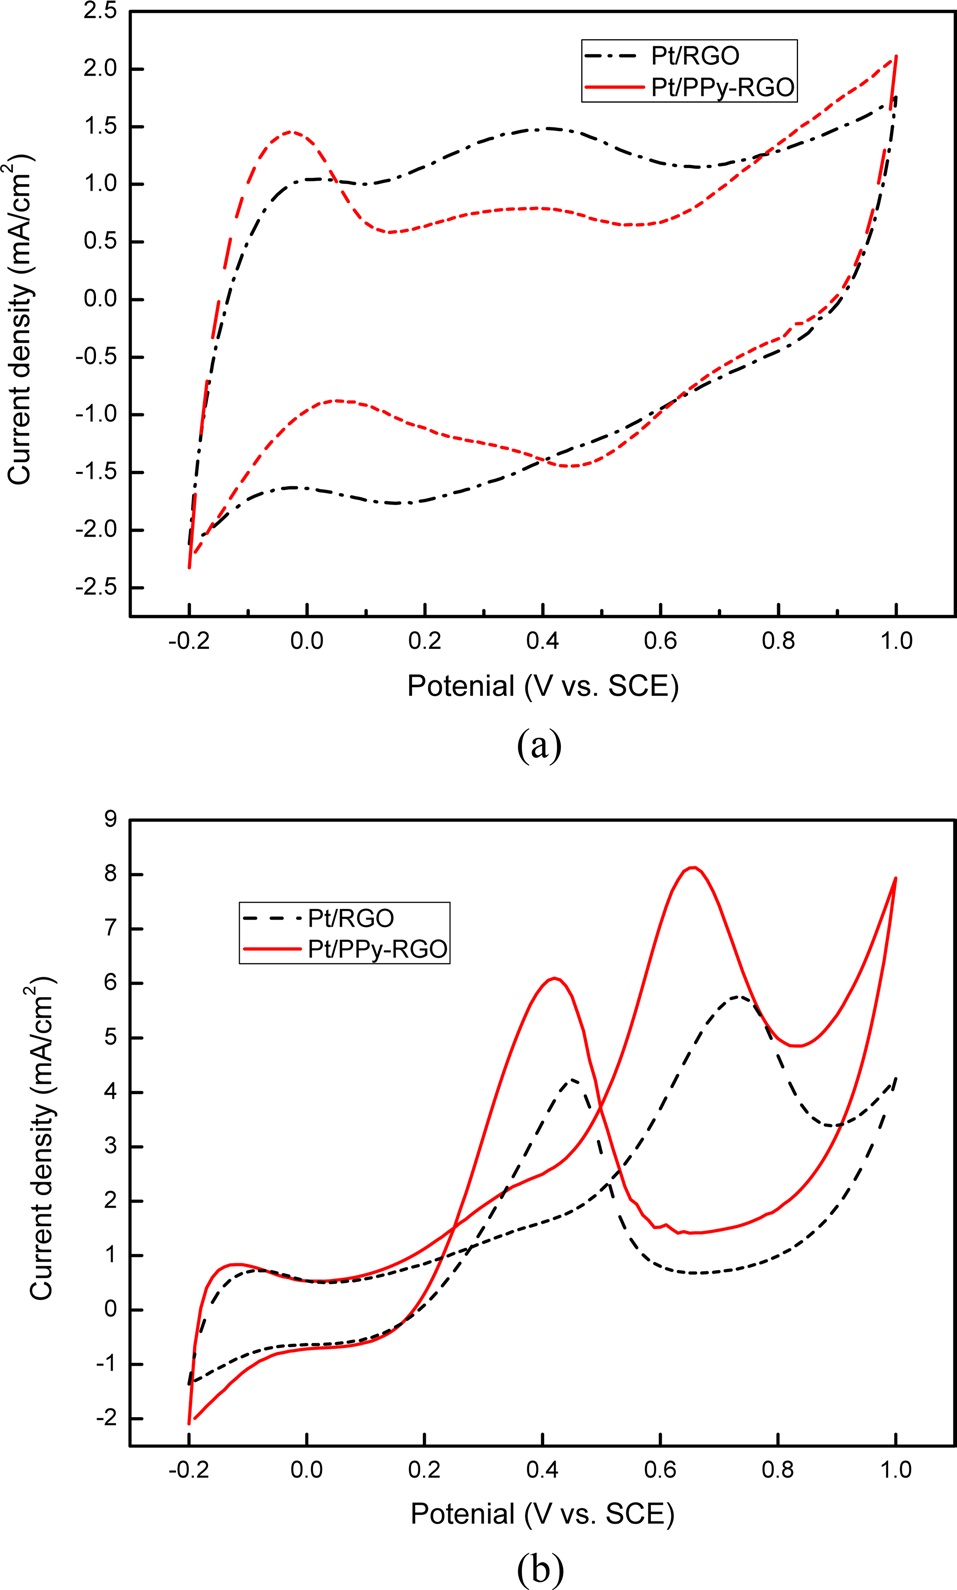 (a) Cyclic voltammetry (CV) of Pt/RGO and Pt/PPy-RGO in 0.5 M H2SO4 solution at a scan rate of 50 mVs01 [<<verify unit] between -0.2 and 1.0 V vs. SCE, (b) CV of Pt/RGO and Pt/PPy-RGO in 0.5 M H2SO4 and 1 M CH3OH solutions, respectively, at a scan rate of 50 mVs-1 between -0.2 V and 1.0 V vs. RGO: reduced graphene oxide, SCE: saturated calomel electrode.